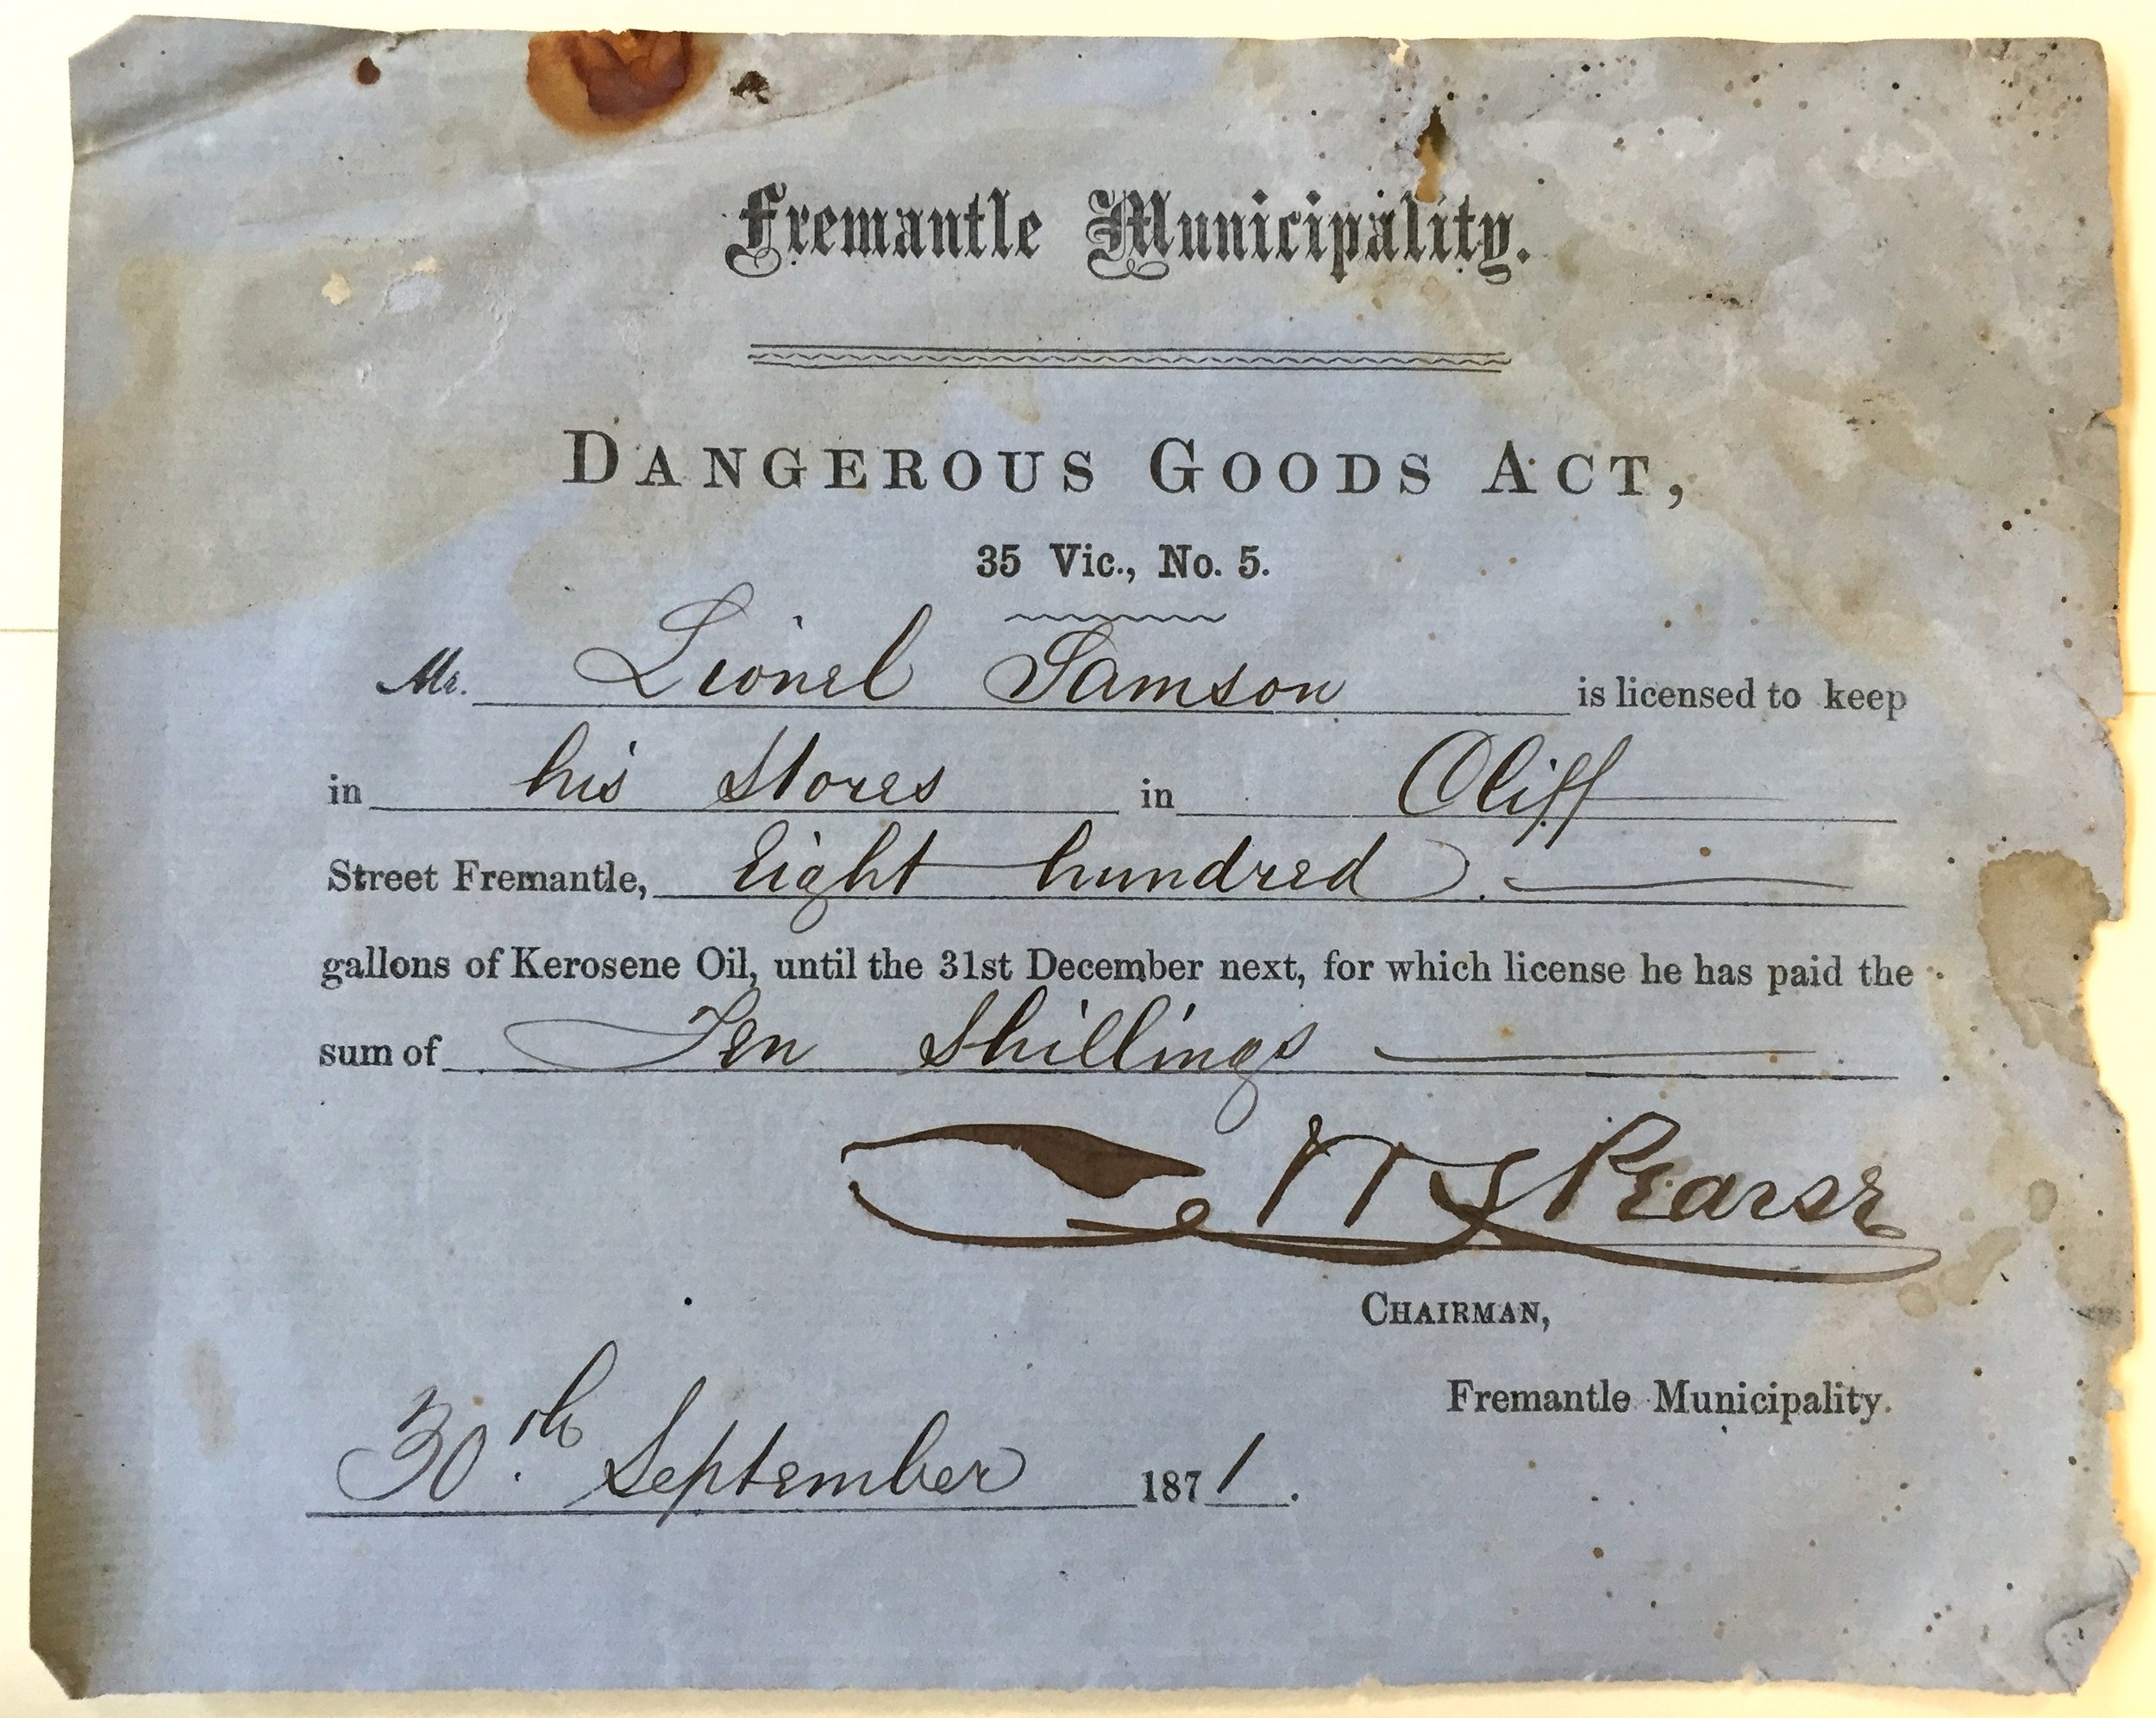 Licence to store dangerous goods 1871